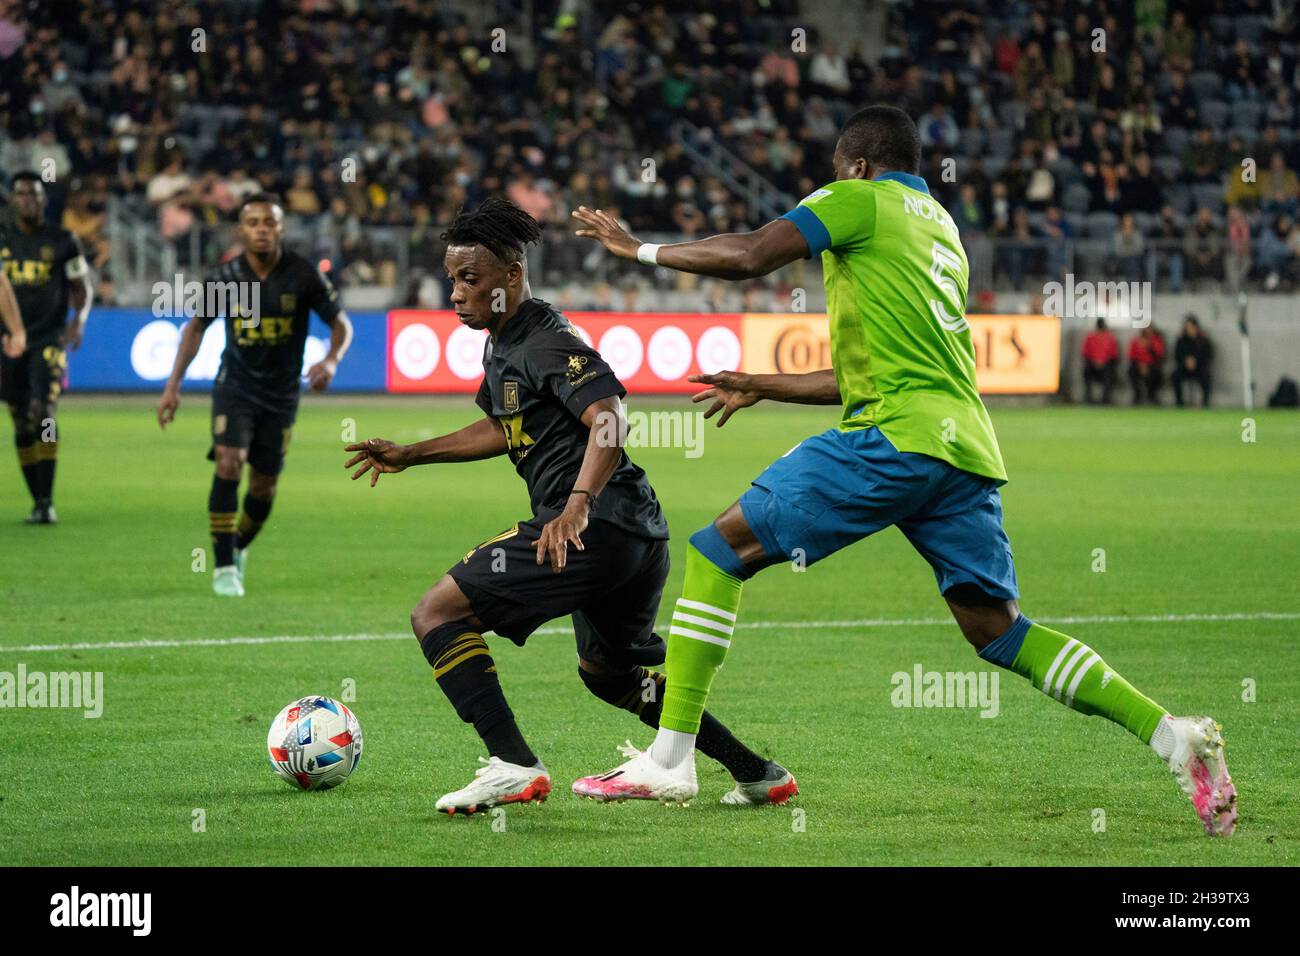 SEATTLE, WA - MAY 16: Seattle Sounders defender Nouhou Tolo (5) slide  tackles the ball away from Los Angeles FC forward Latif Blessing (7) during  an MLS match between LAFC and the